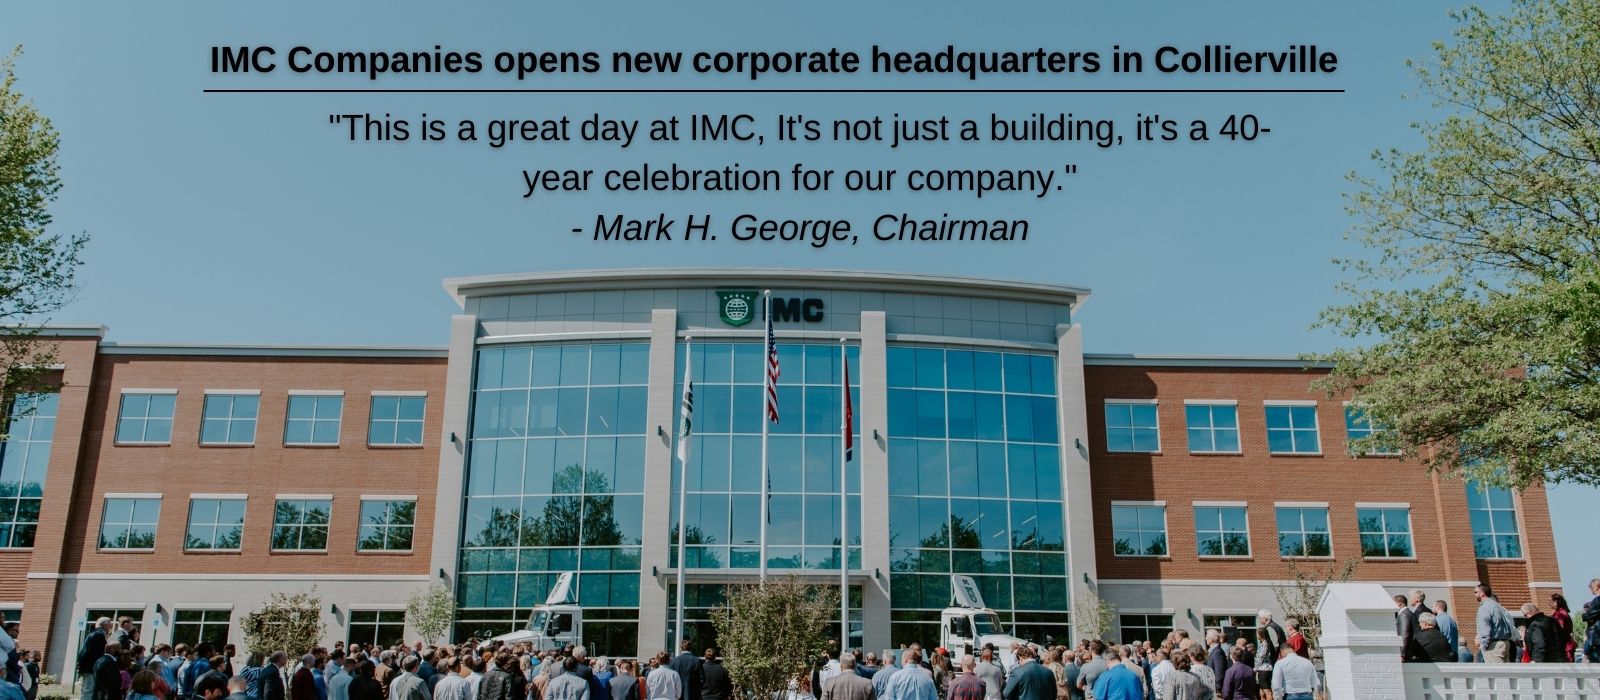 IMC Companies opens new corporate headquarters in Collierville